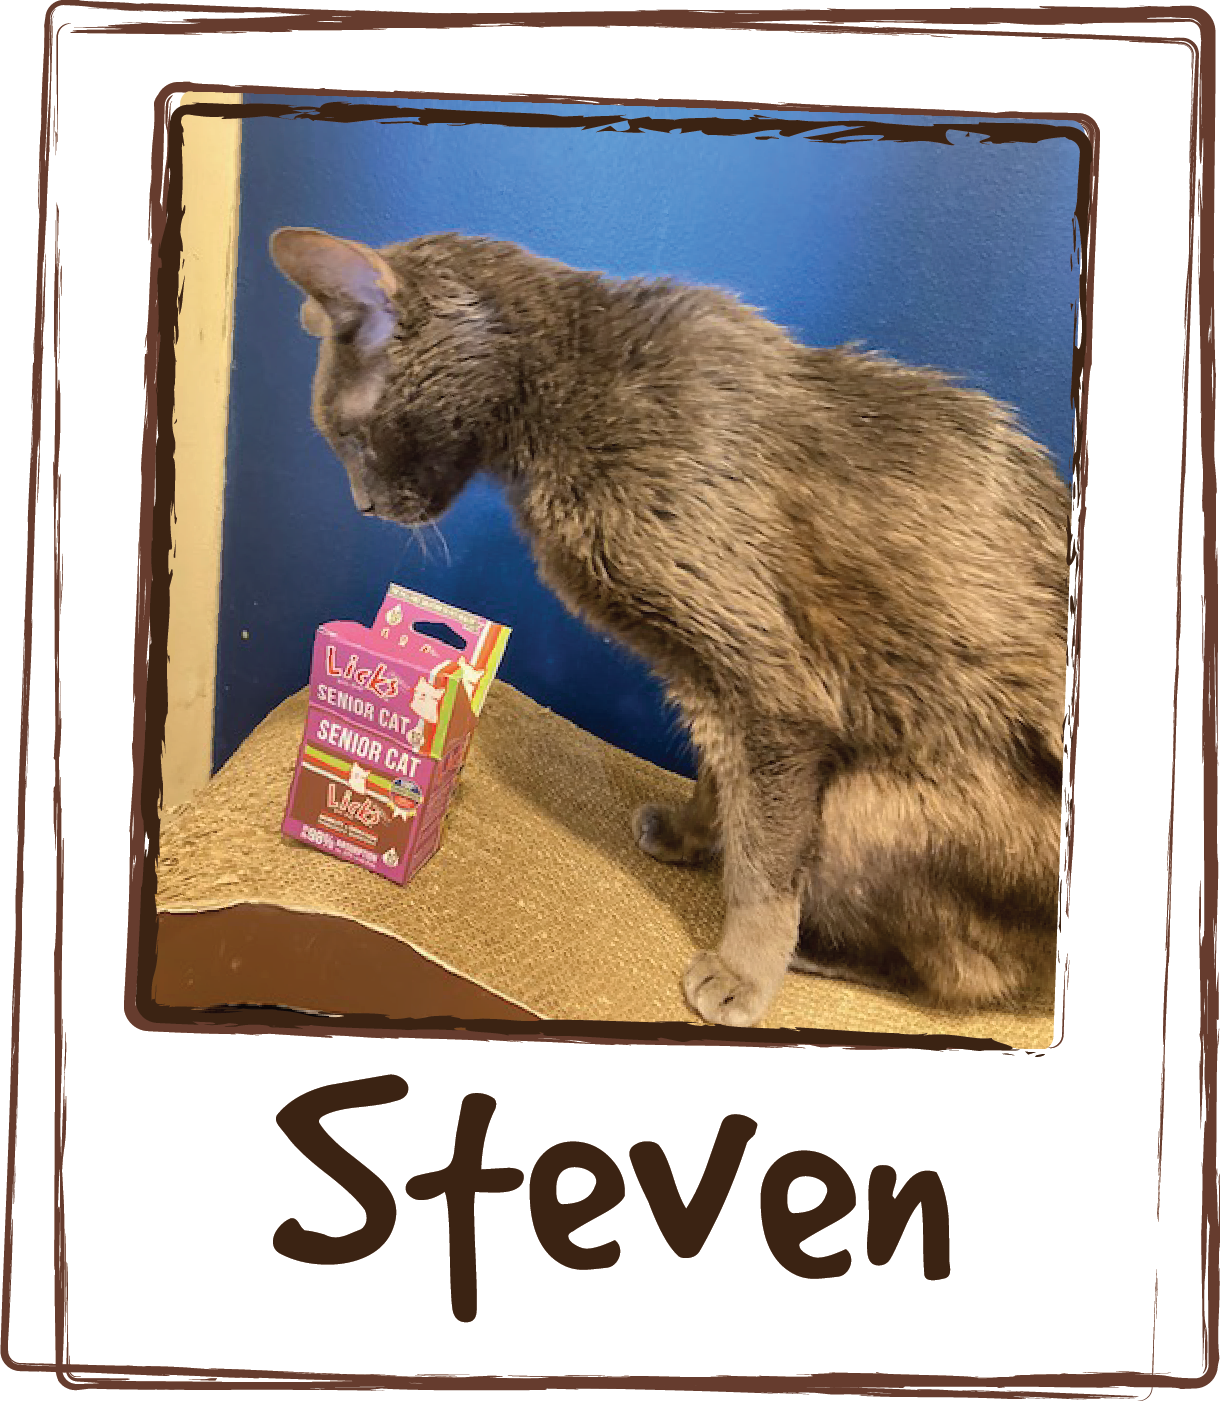  “Steven is my 17-year-old 3-legged Russian Blue. He loves Senior Cats Licks! He licks it right out of the envelope!” 